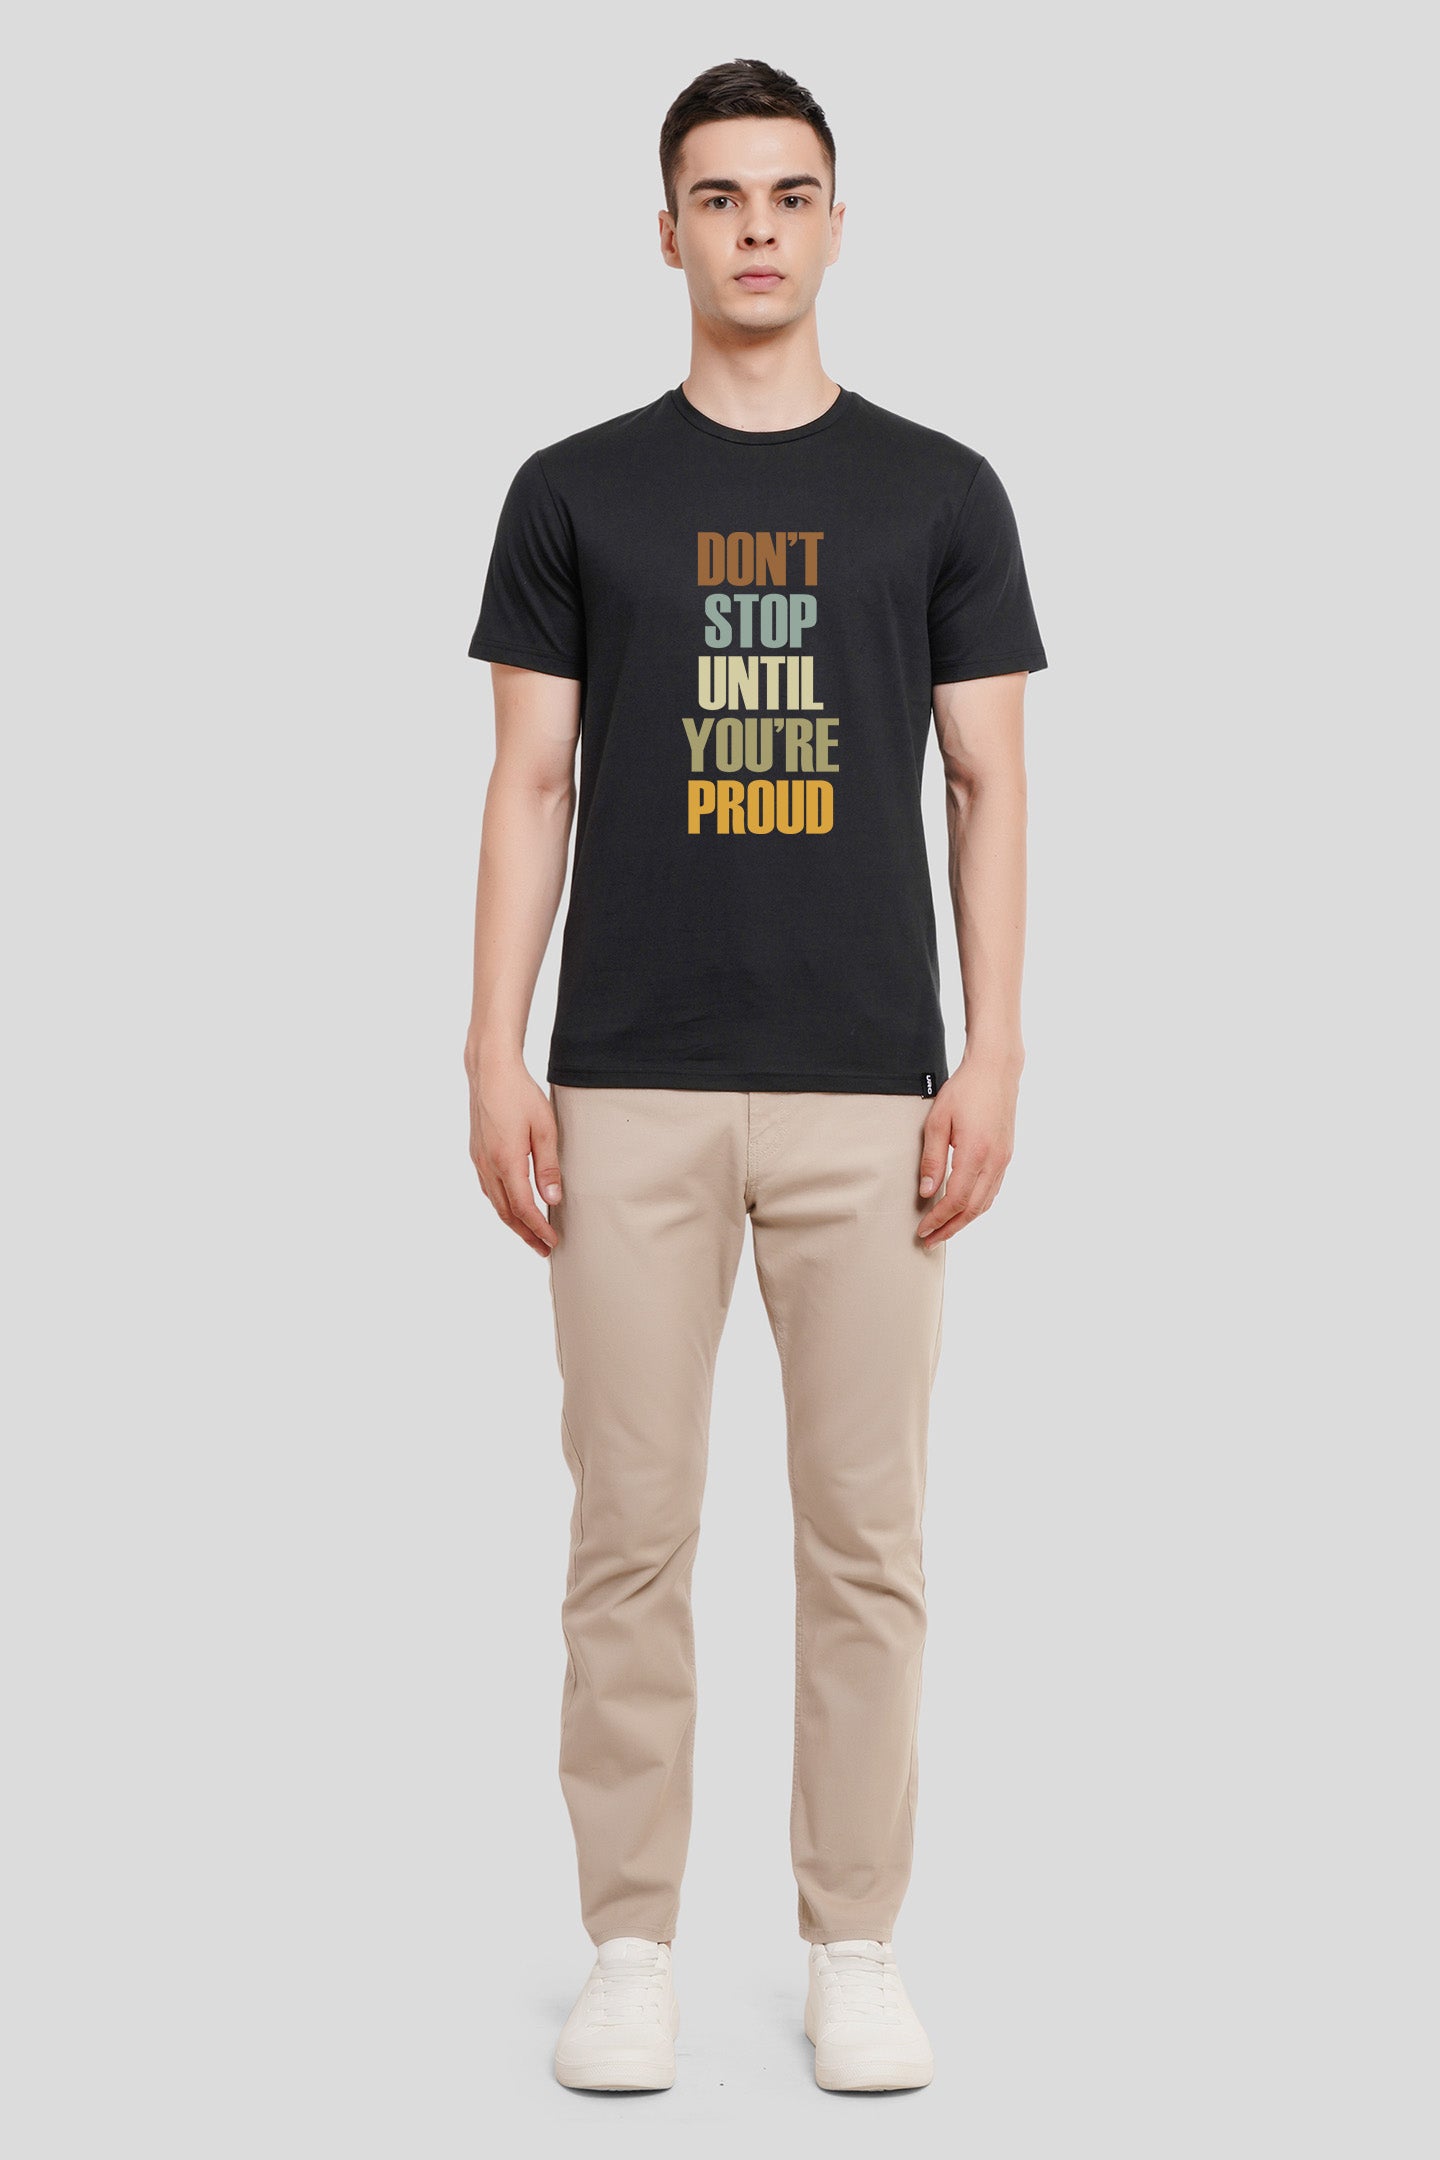 Dont Stop Until You Are Proud Black Printed T Shirt Men Regular Fit With Front Design Pic 4